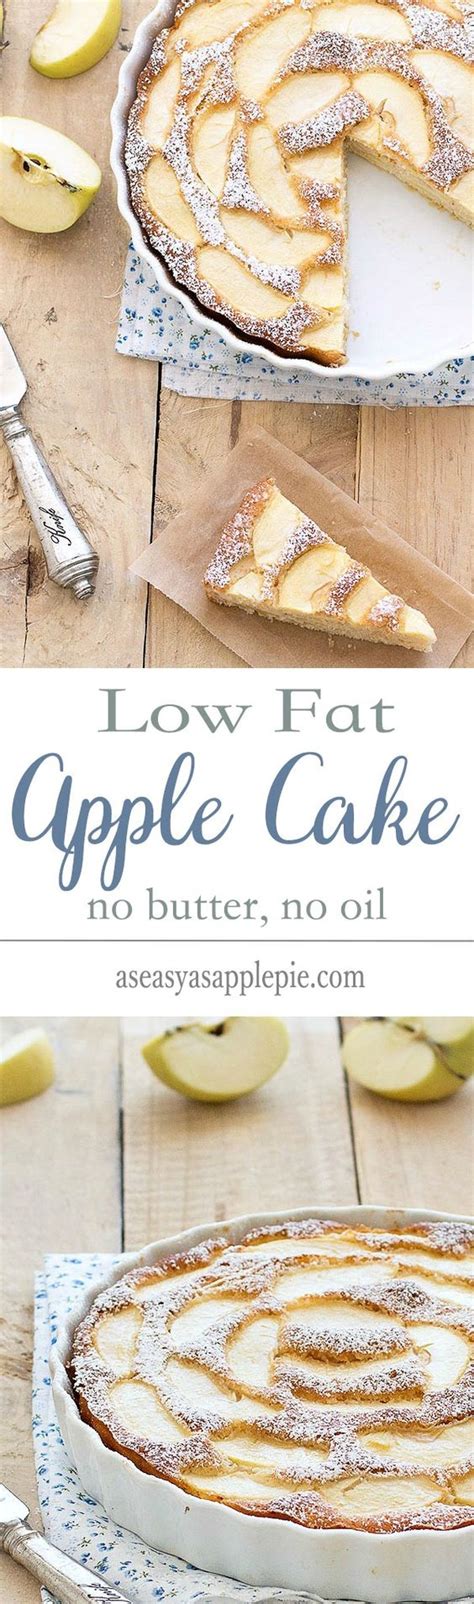 One package of fat free and sugar free pudding that you feel will go well with the low calorie cake. Low Fat Apple Cake | Recipe | Follow me, Dairy and Cakes